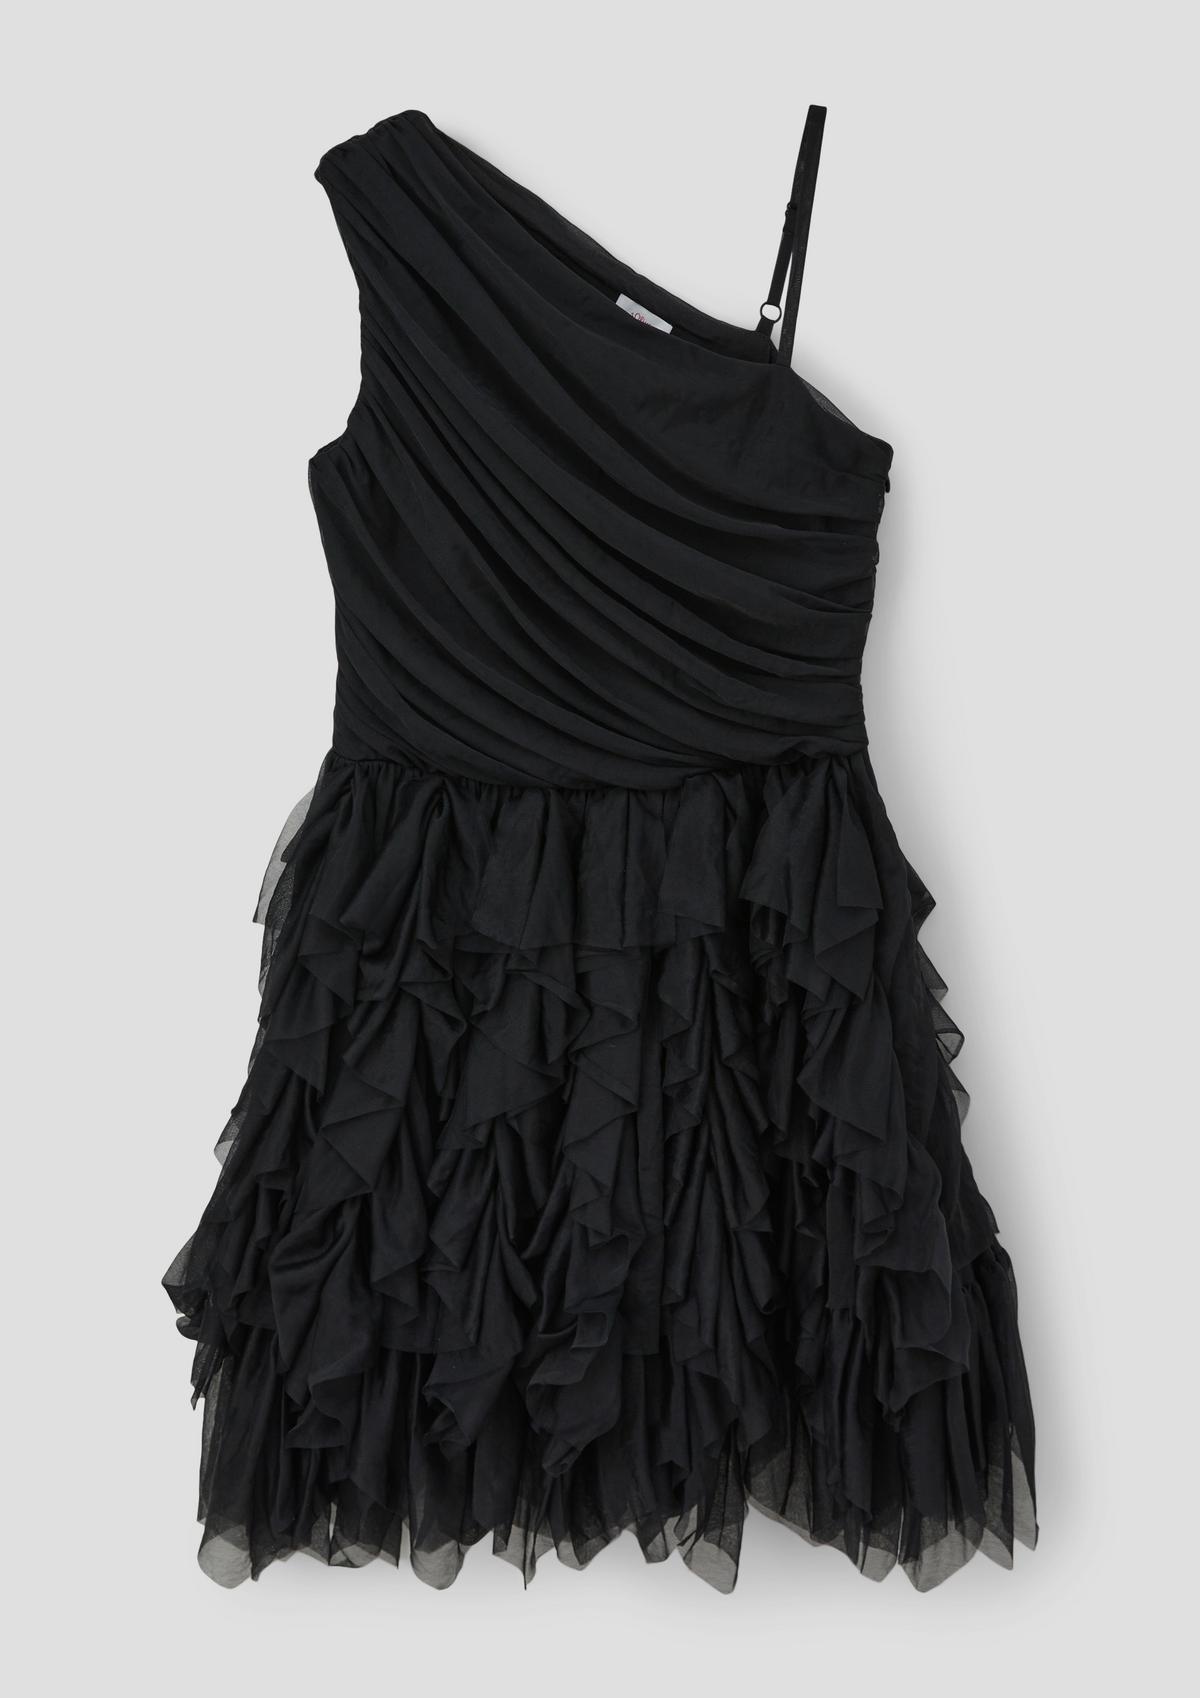 s.Oliver One-shoulder dress with a flounce skirt